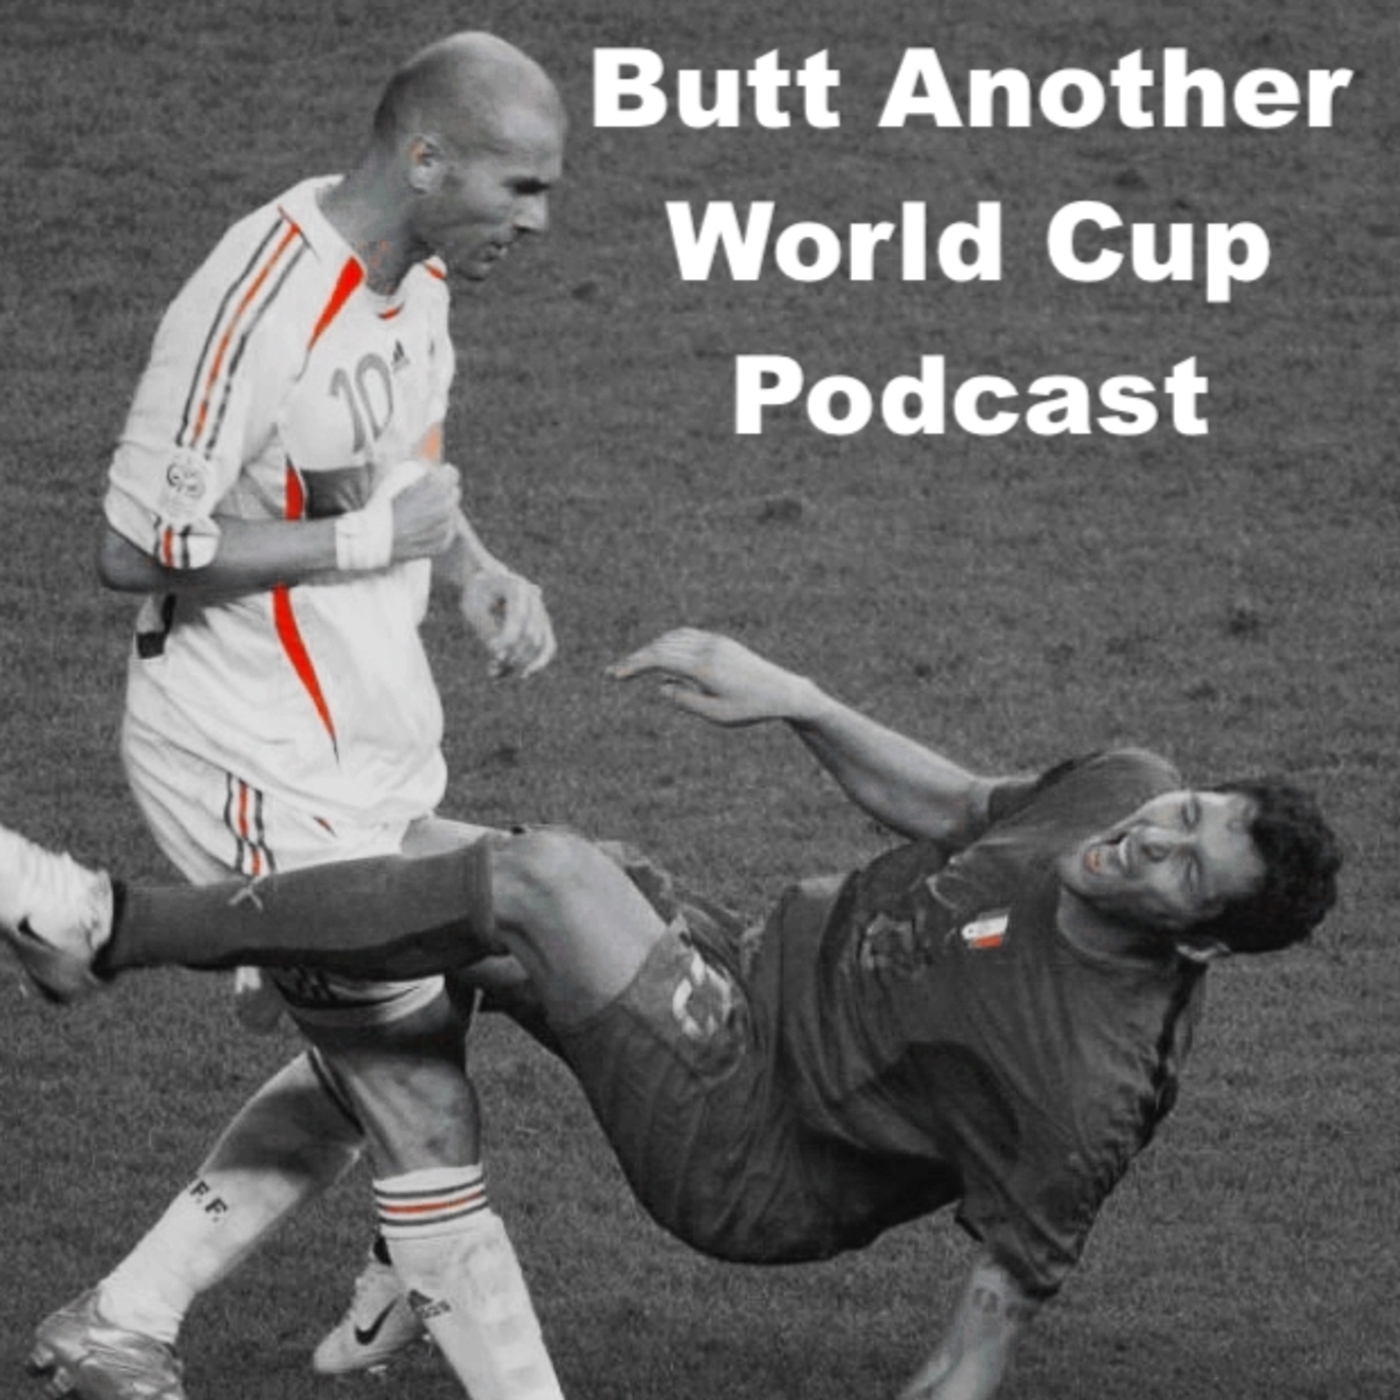 Butt Another World Cup Podcast